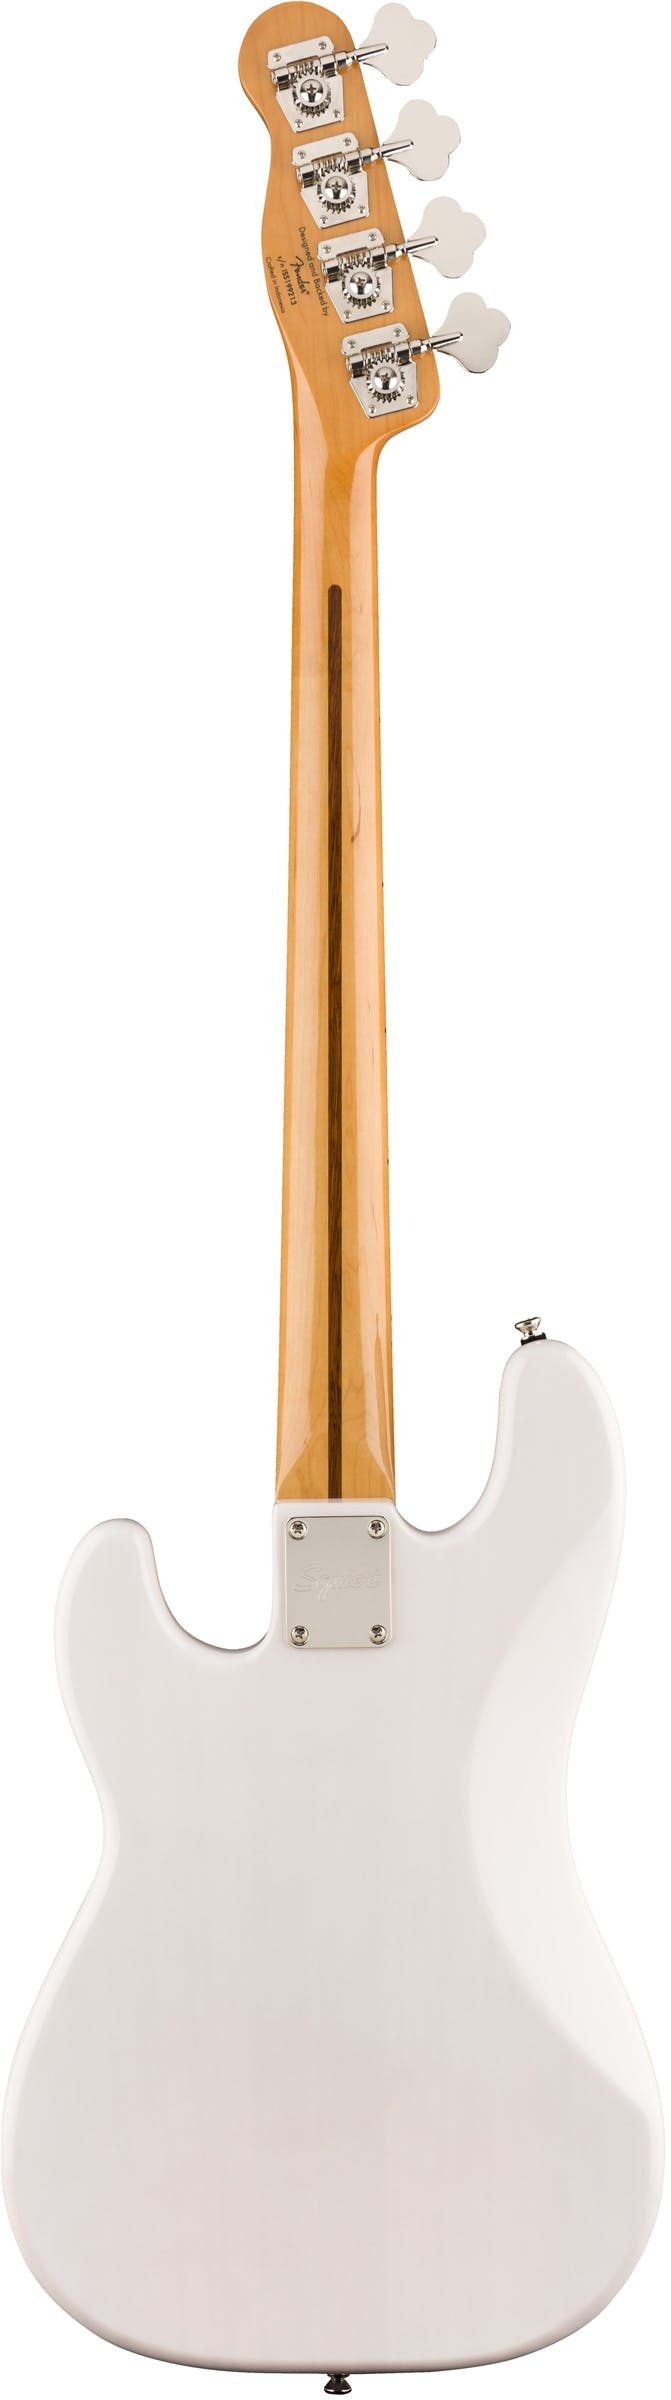 Squier Classic Vibe 50s Precision Bass in White Blonde - Andertons Music Co.